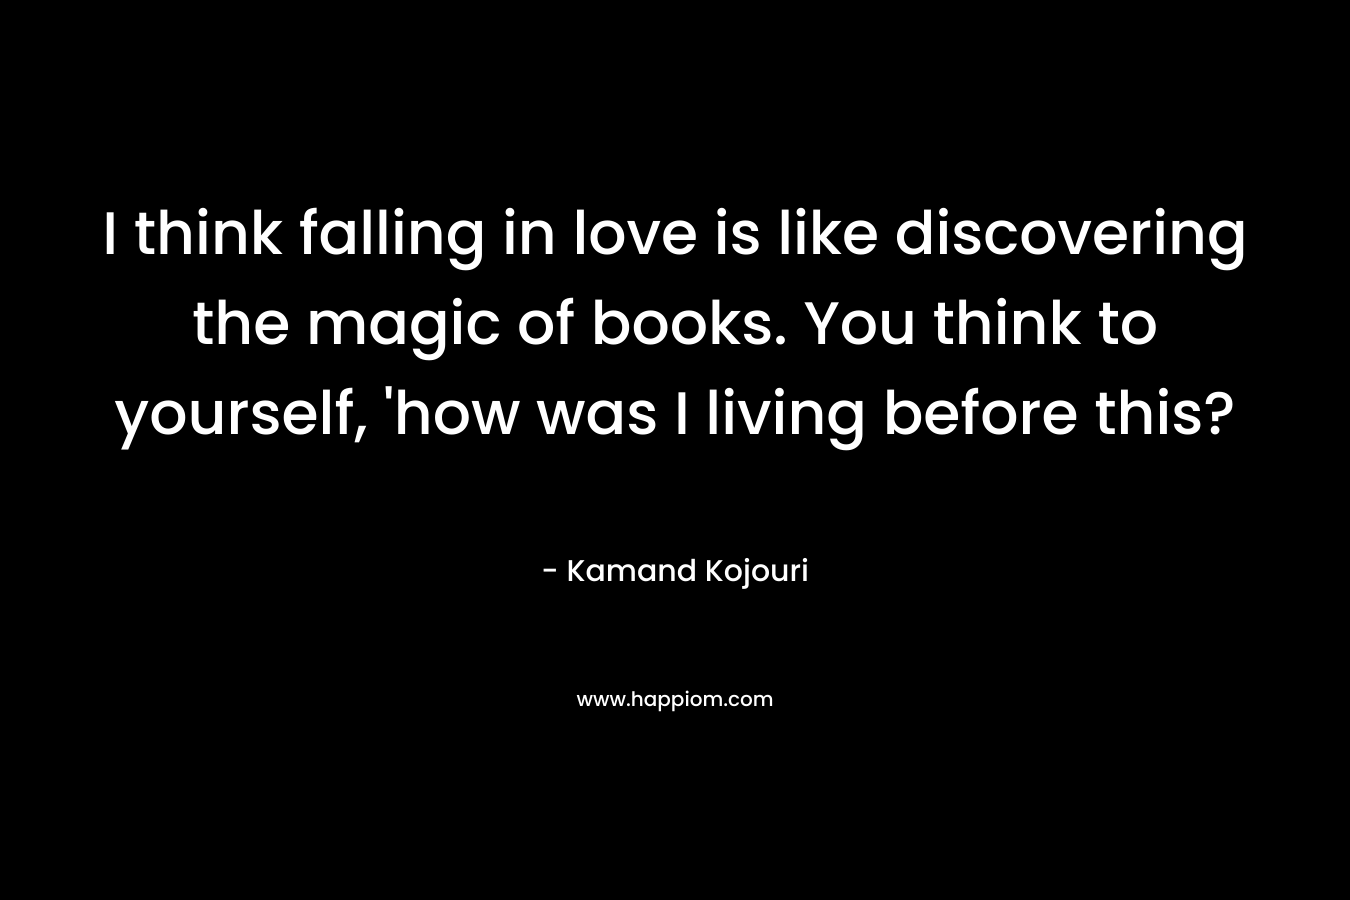 I think falling in love is like discovering the magic of books. You think to yourself, 'how was I living before this?